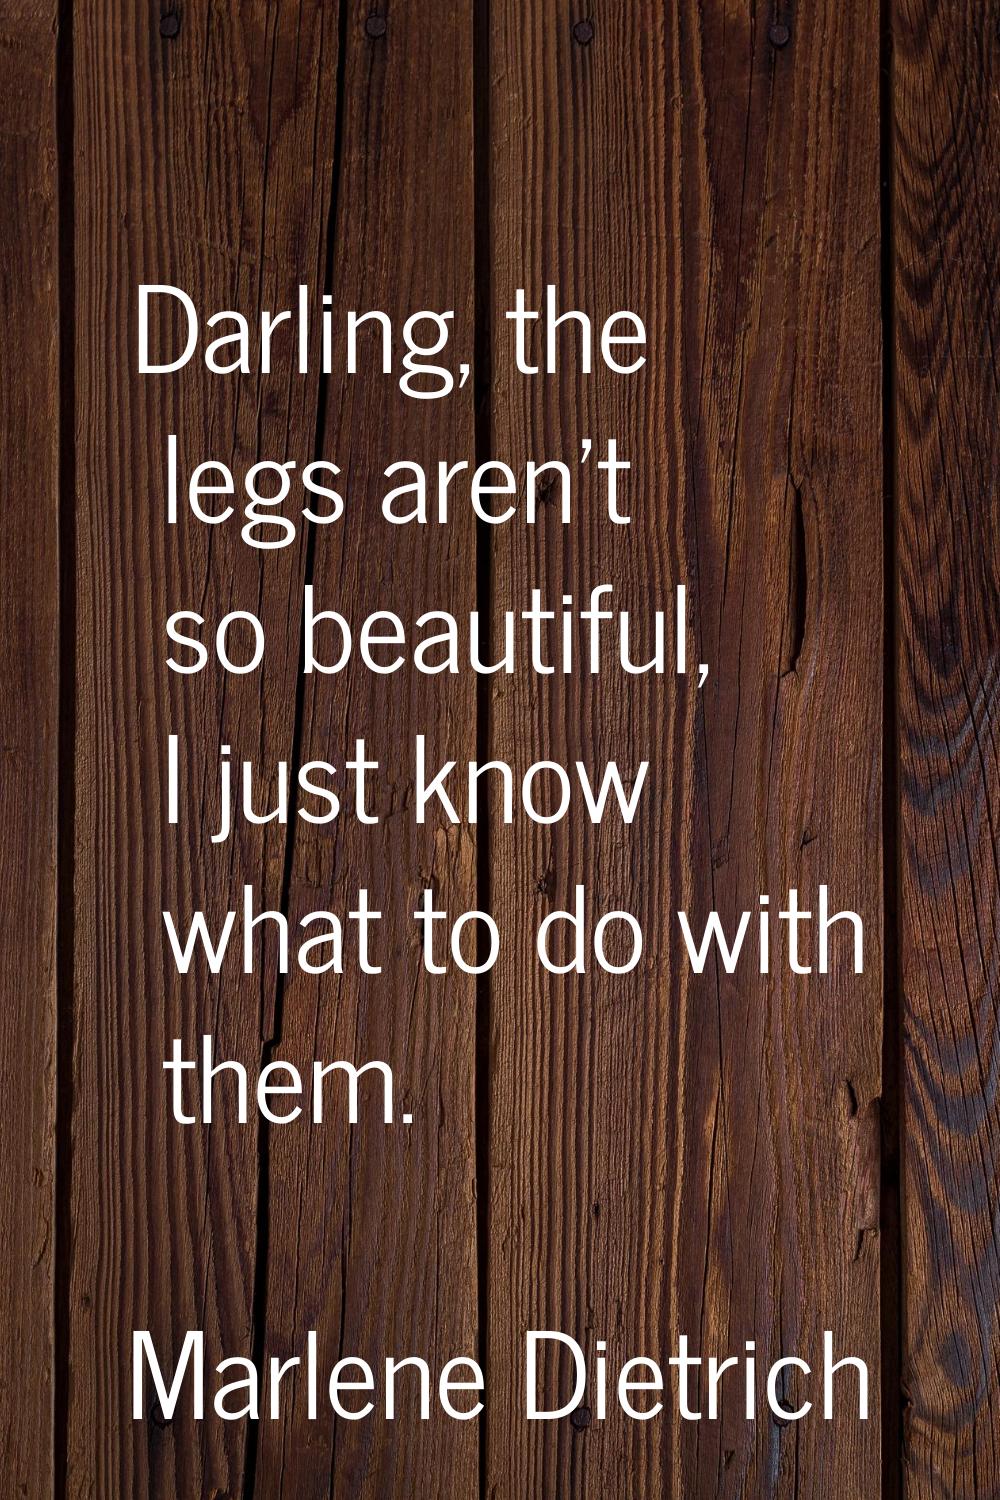 Darling, the legs aren't so beautiful, I just know what to do with them.